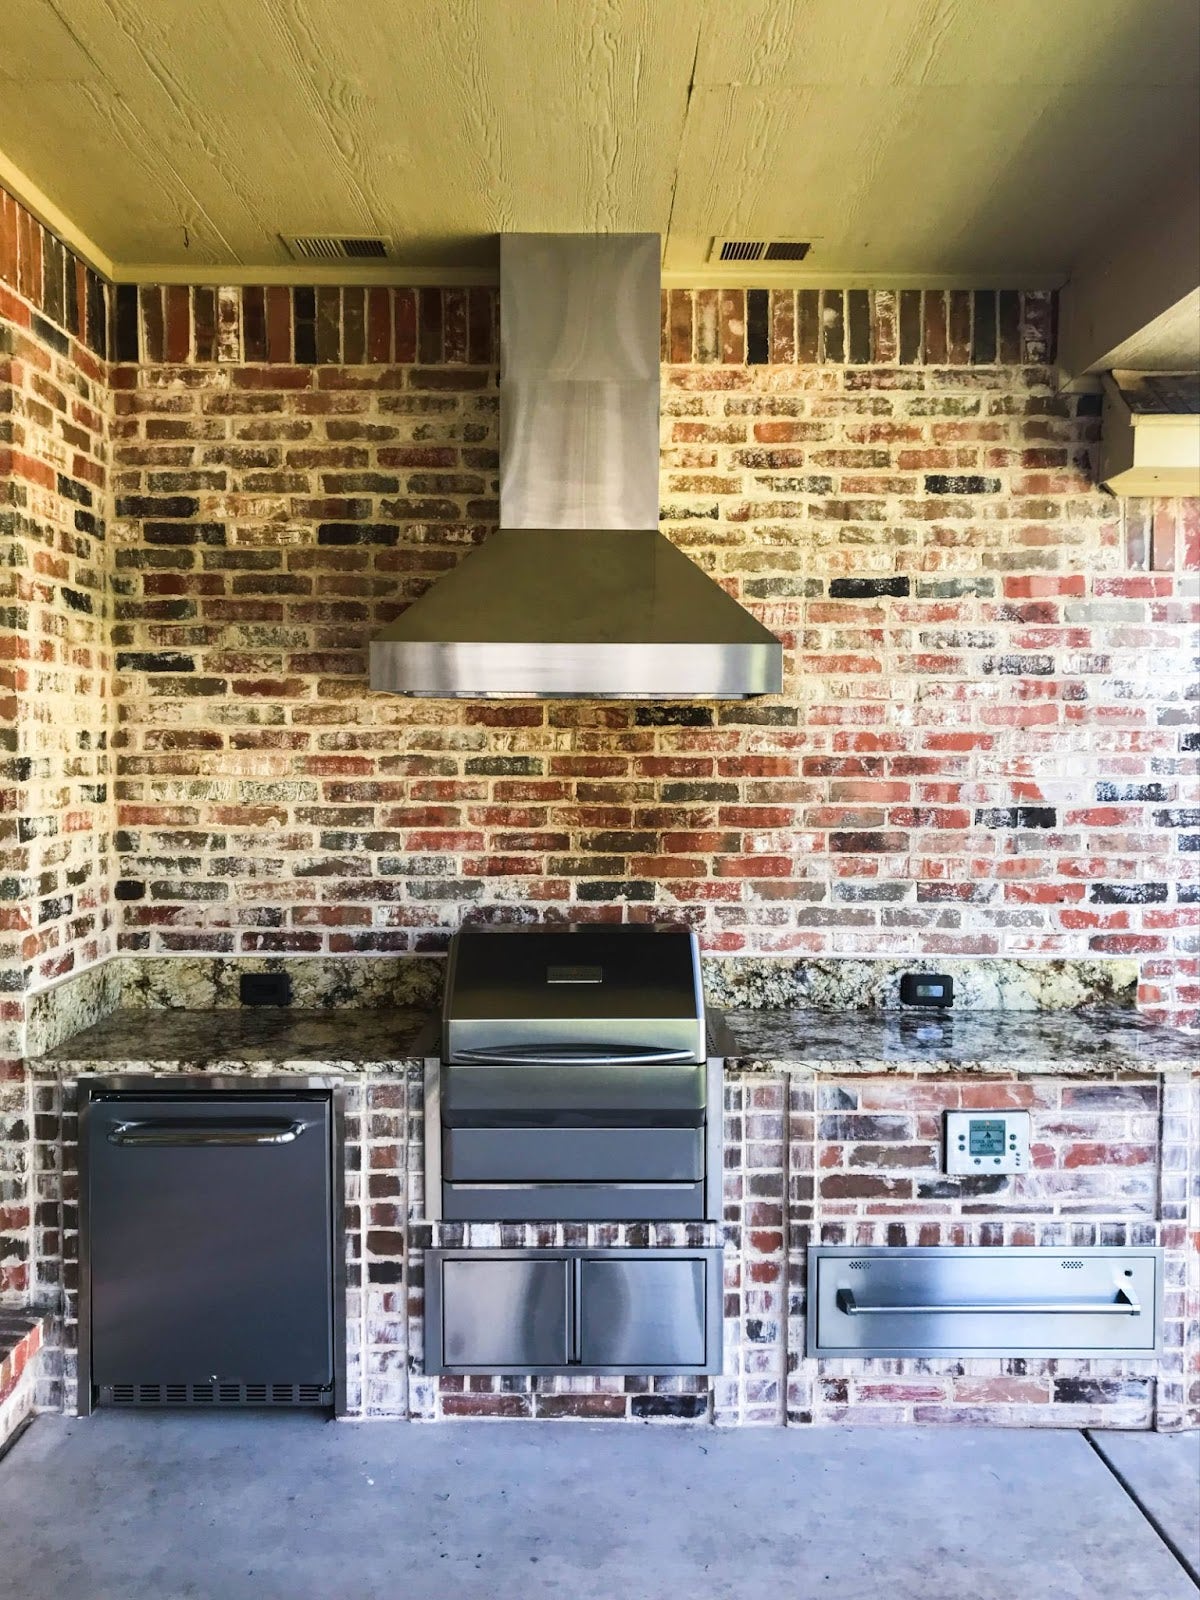 Outdoor kitchen with a Proline range hood, stainless steel appliances, and a rustic red brick wall - prolinerangehoods.com